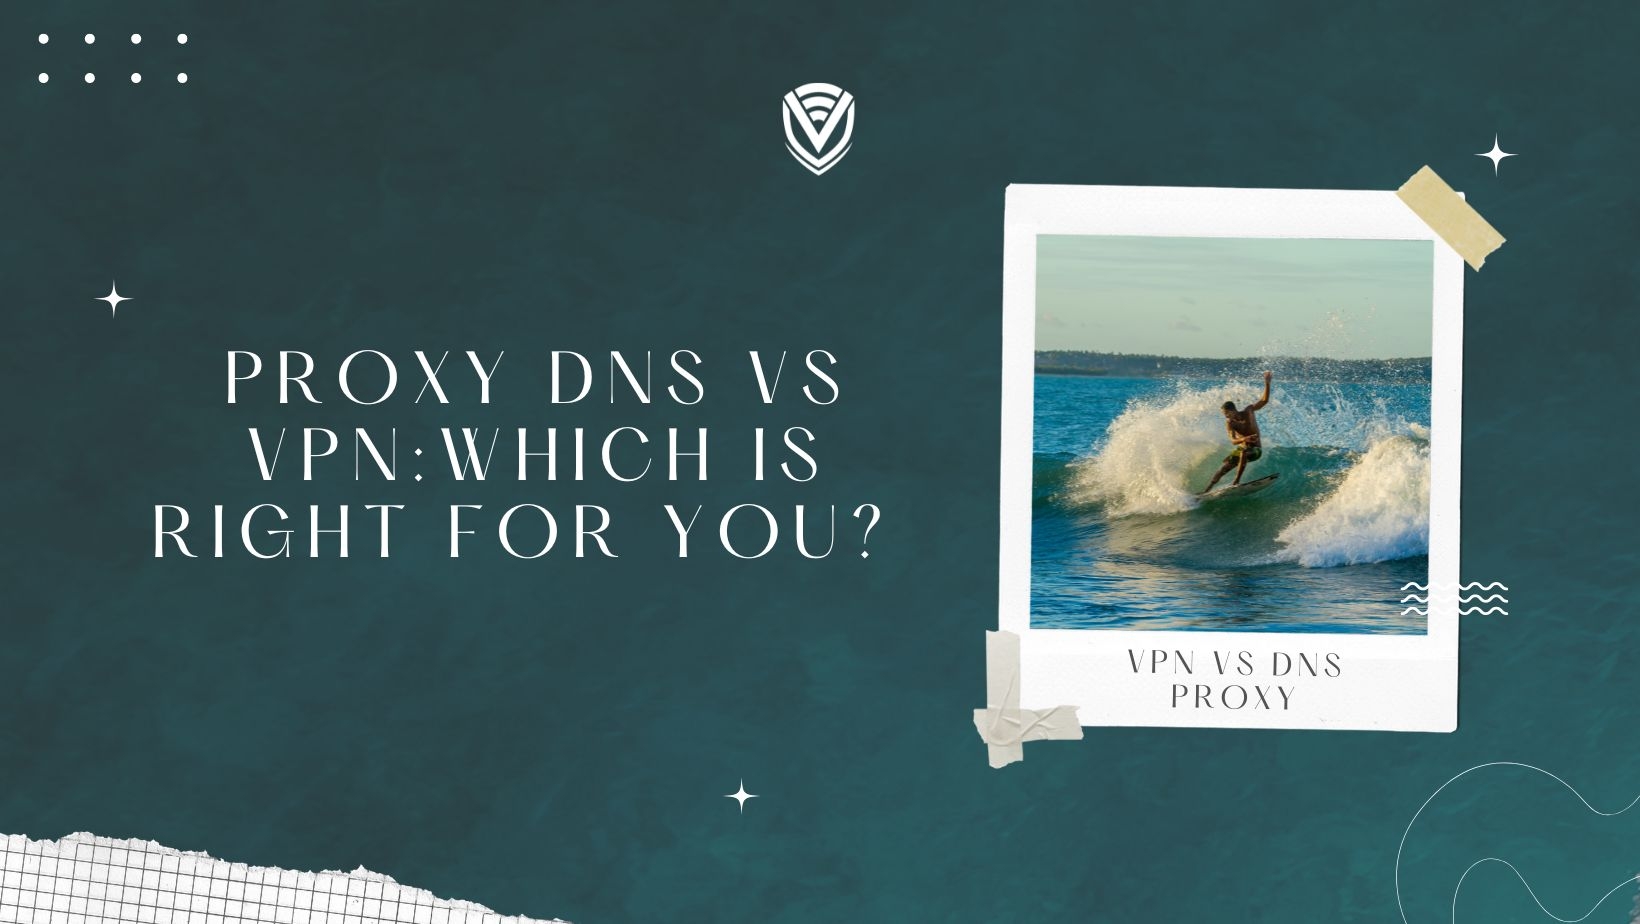 Proxy DNS vs VPN: Which Is Right For You?